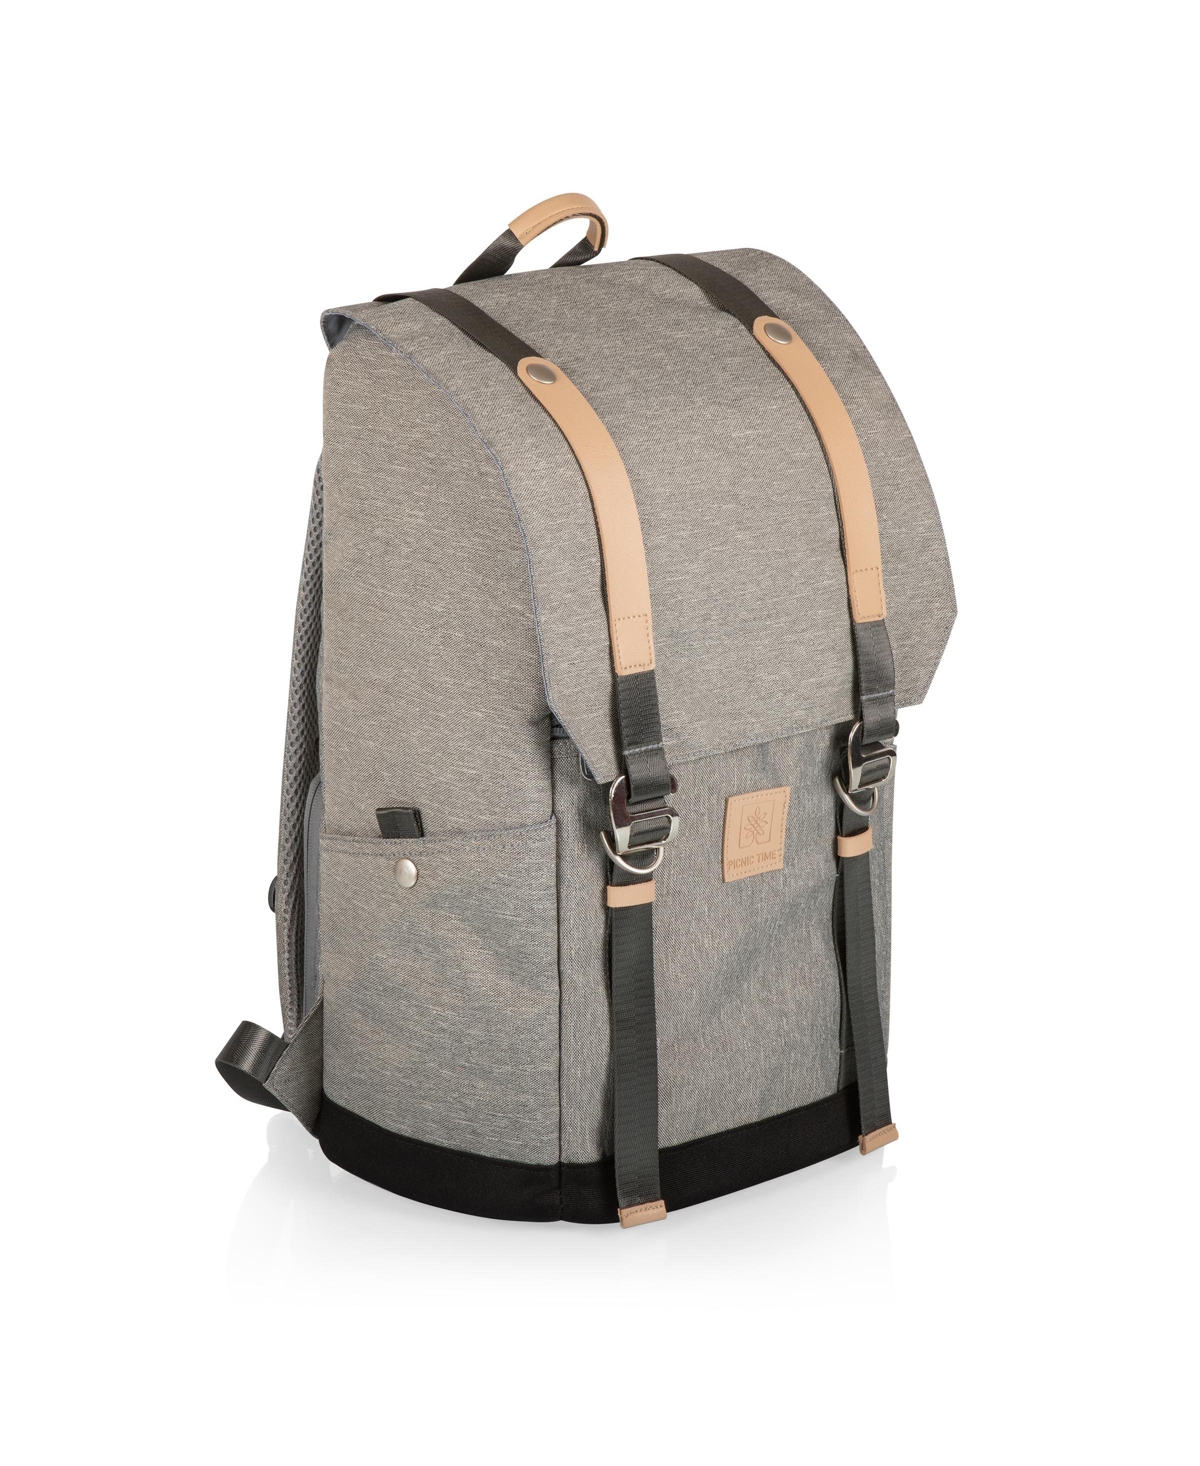 Picnic Time Frontier Picnic Backpack - Heathered Gray